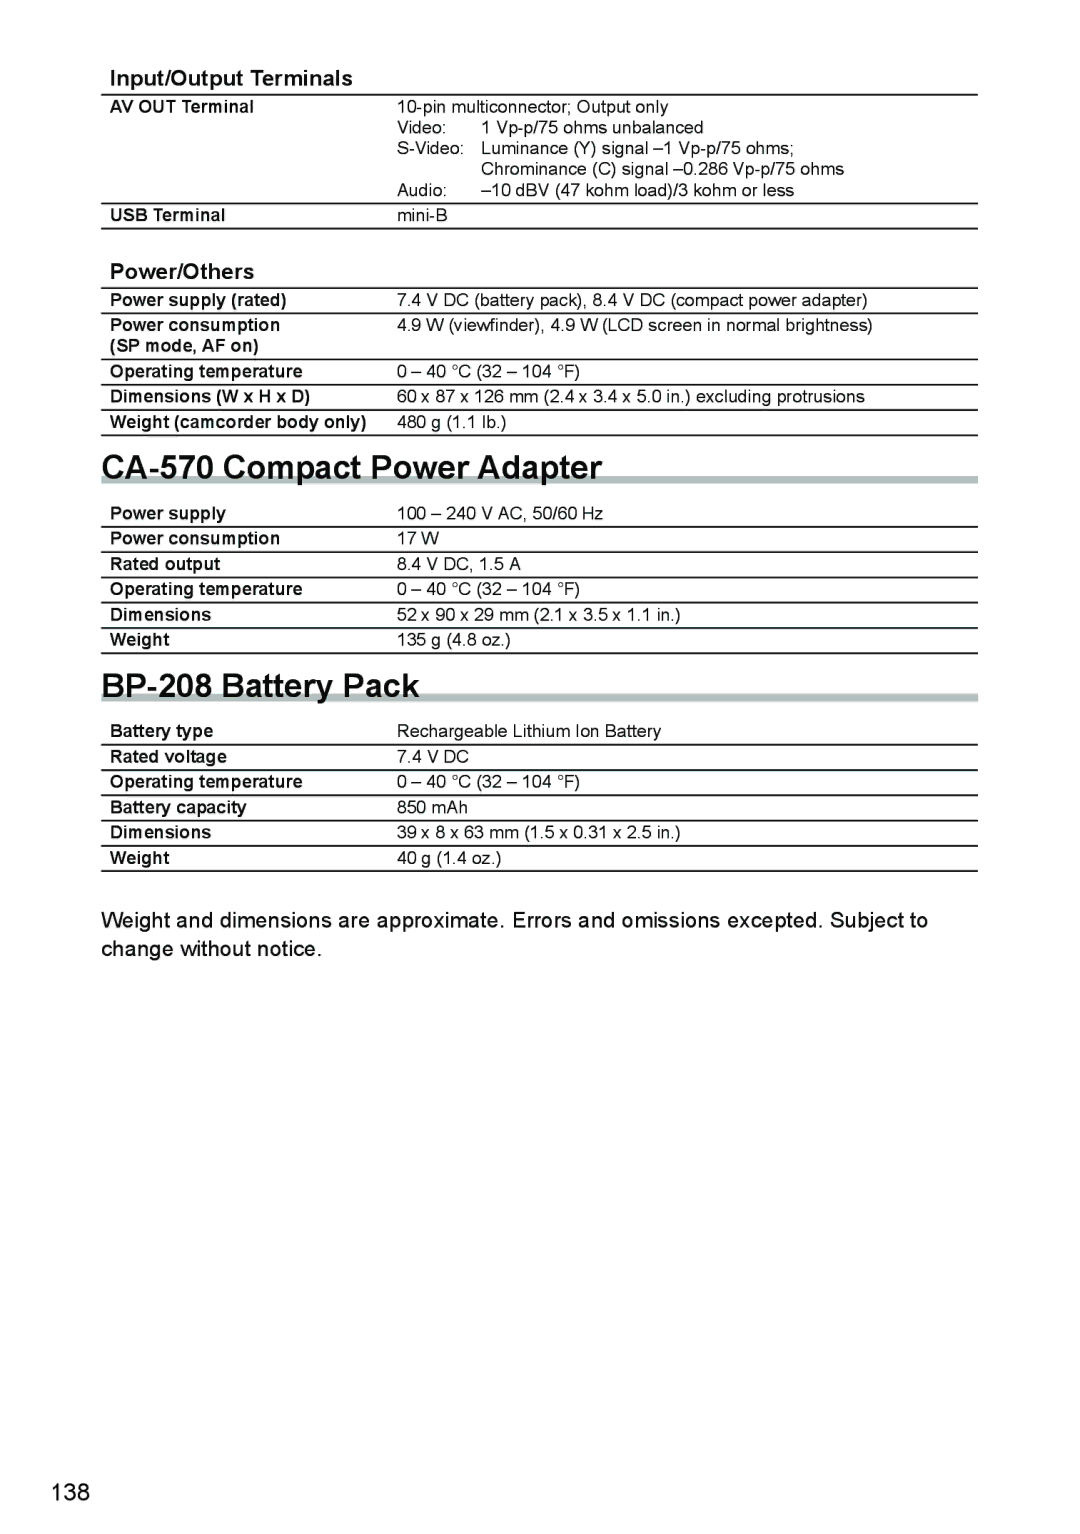 Canon DC40 instruction manual CA-570 Compact Power Adapter, BP-208 Battery Pack, Input/Output Terminals, Power/Others 